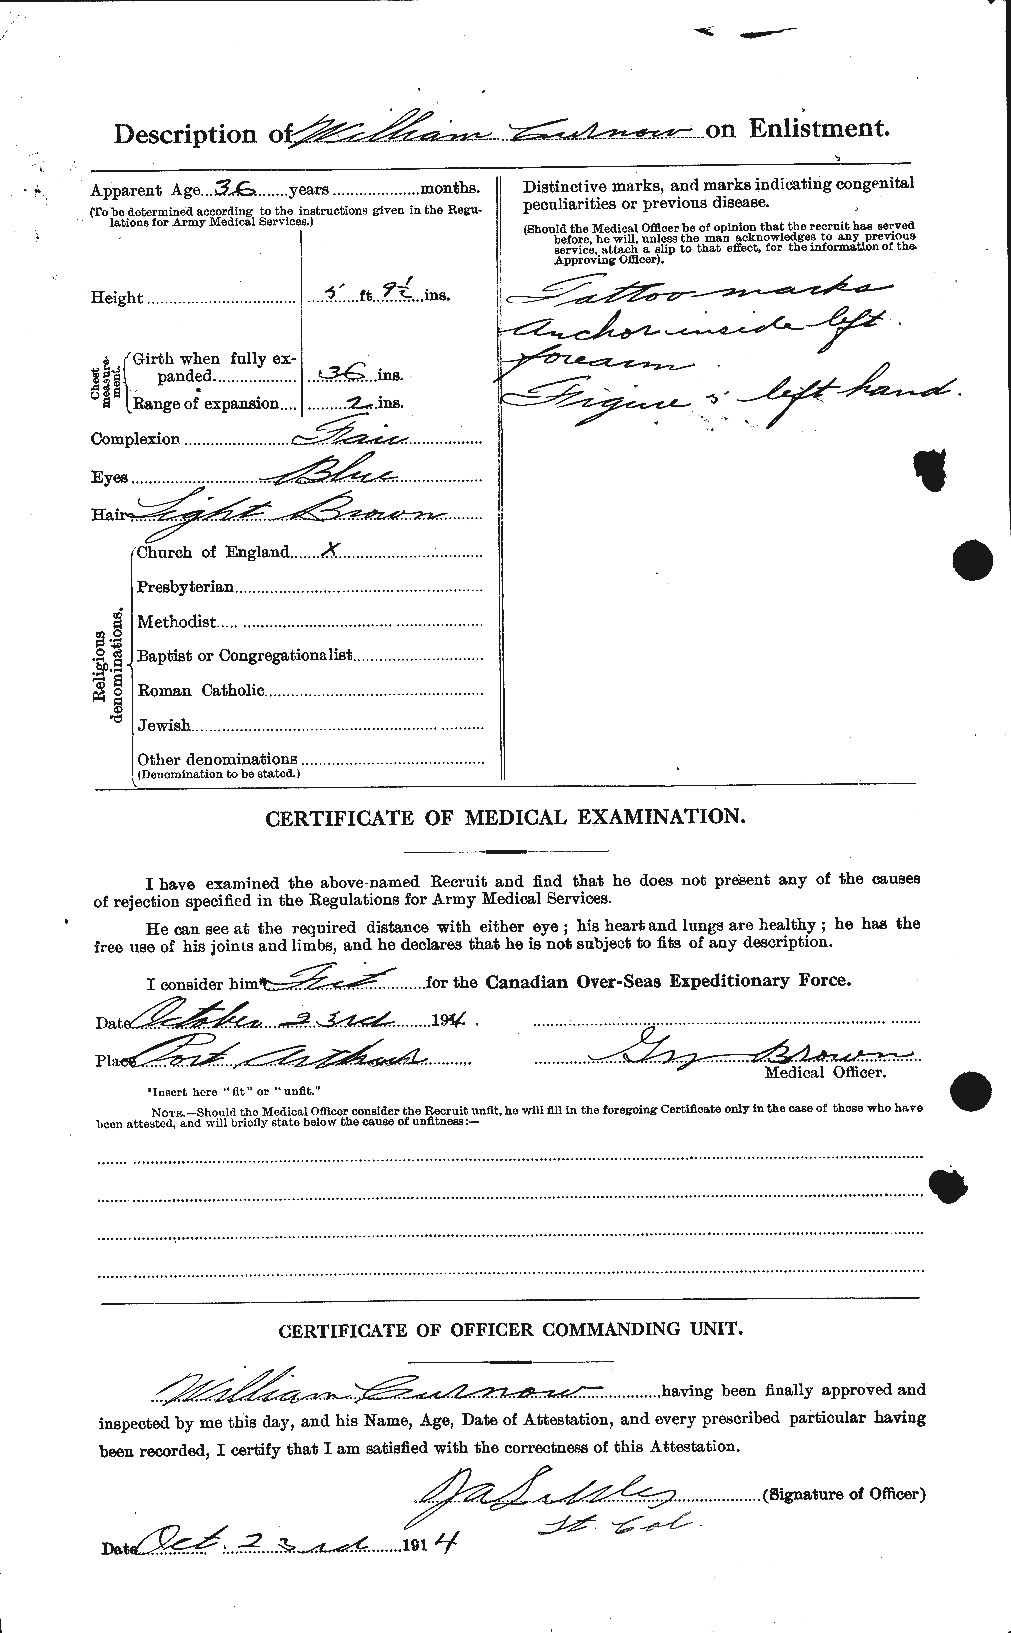 Personnel Records of the First World War - CEF 074791b